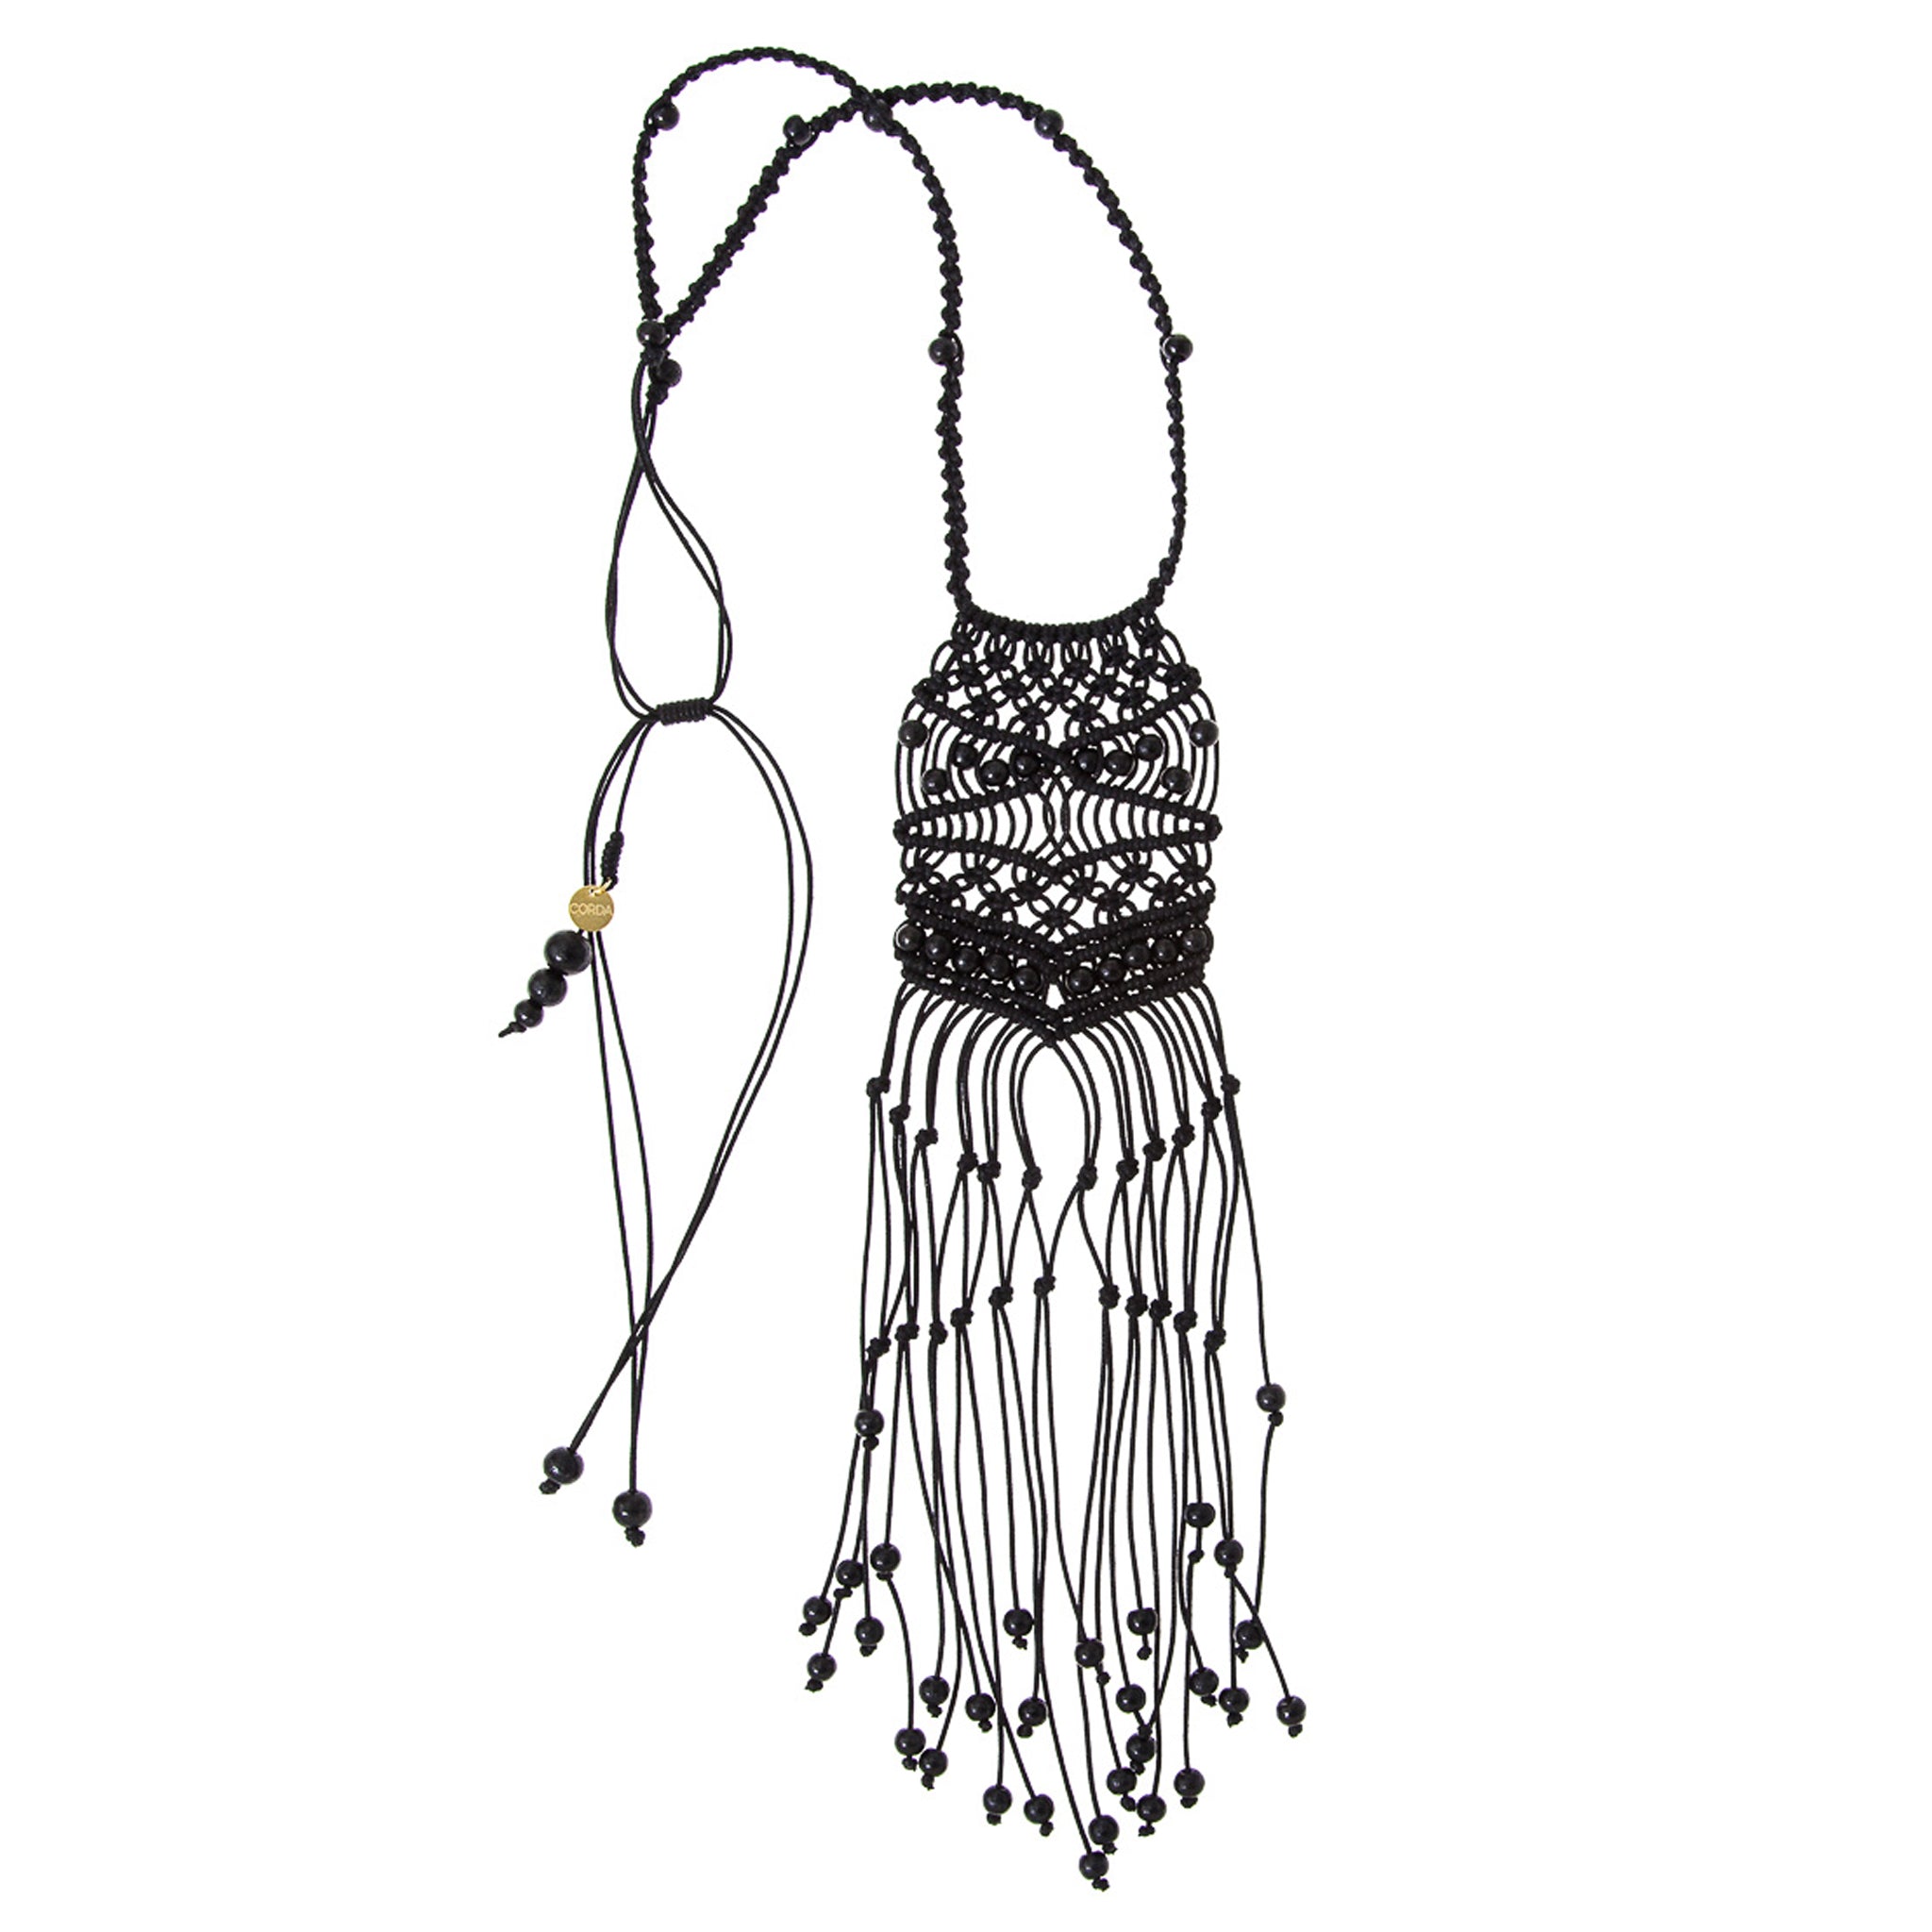 Crochet lace & draped metal body chain necklace – Terry Macc